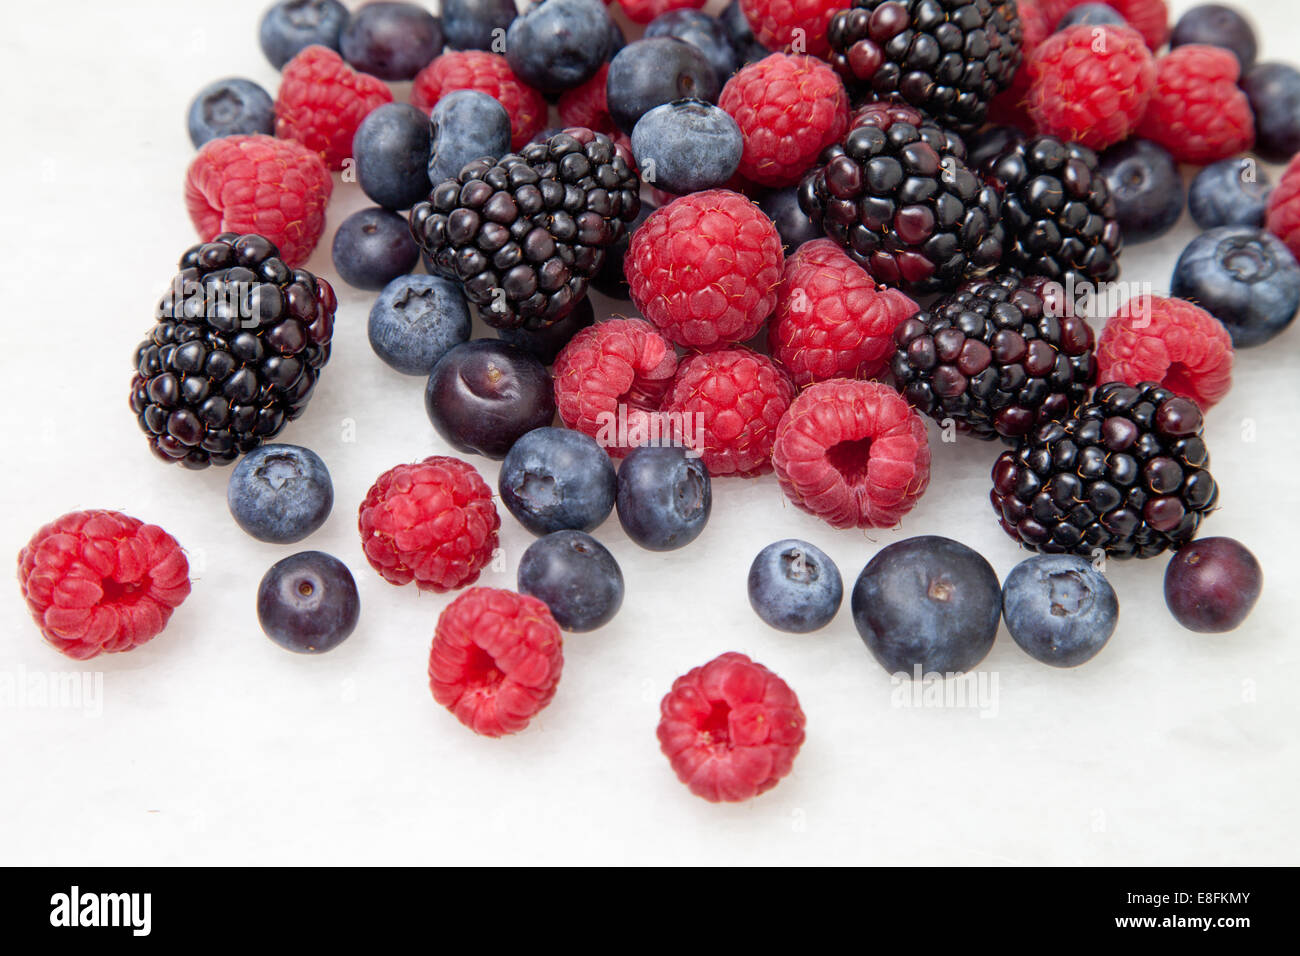 Close-up overhead view of fresh blueberries, raspberries and blackberries on a table Stock Photo